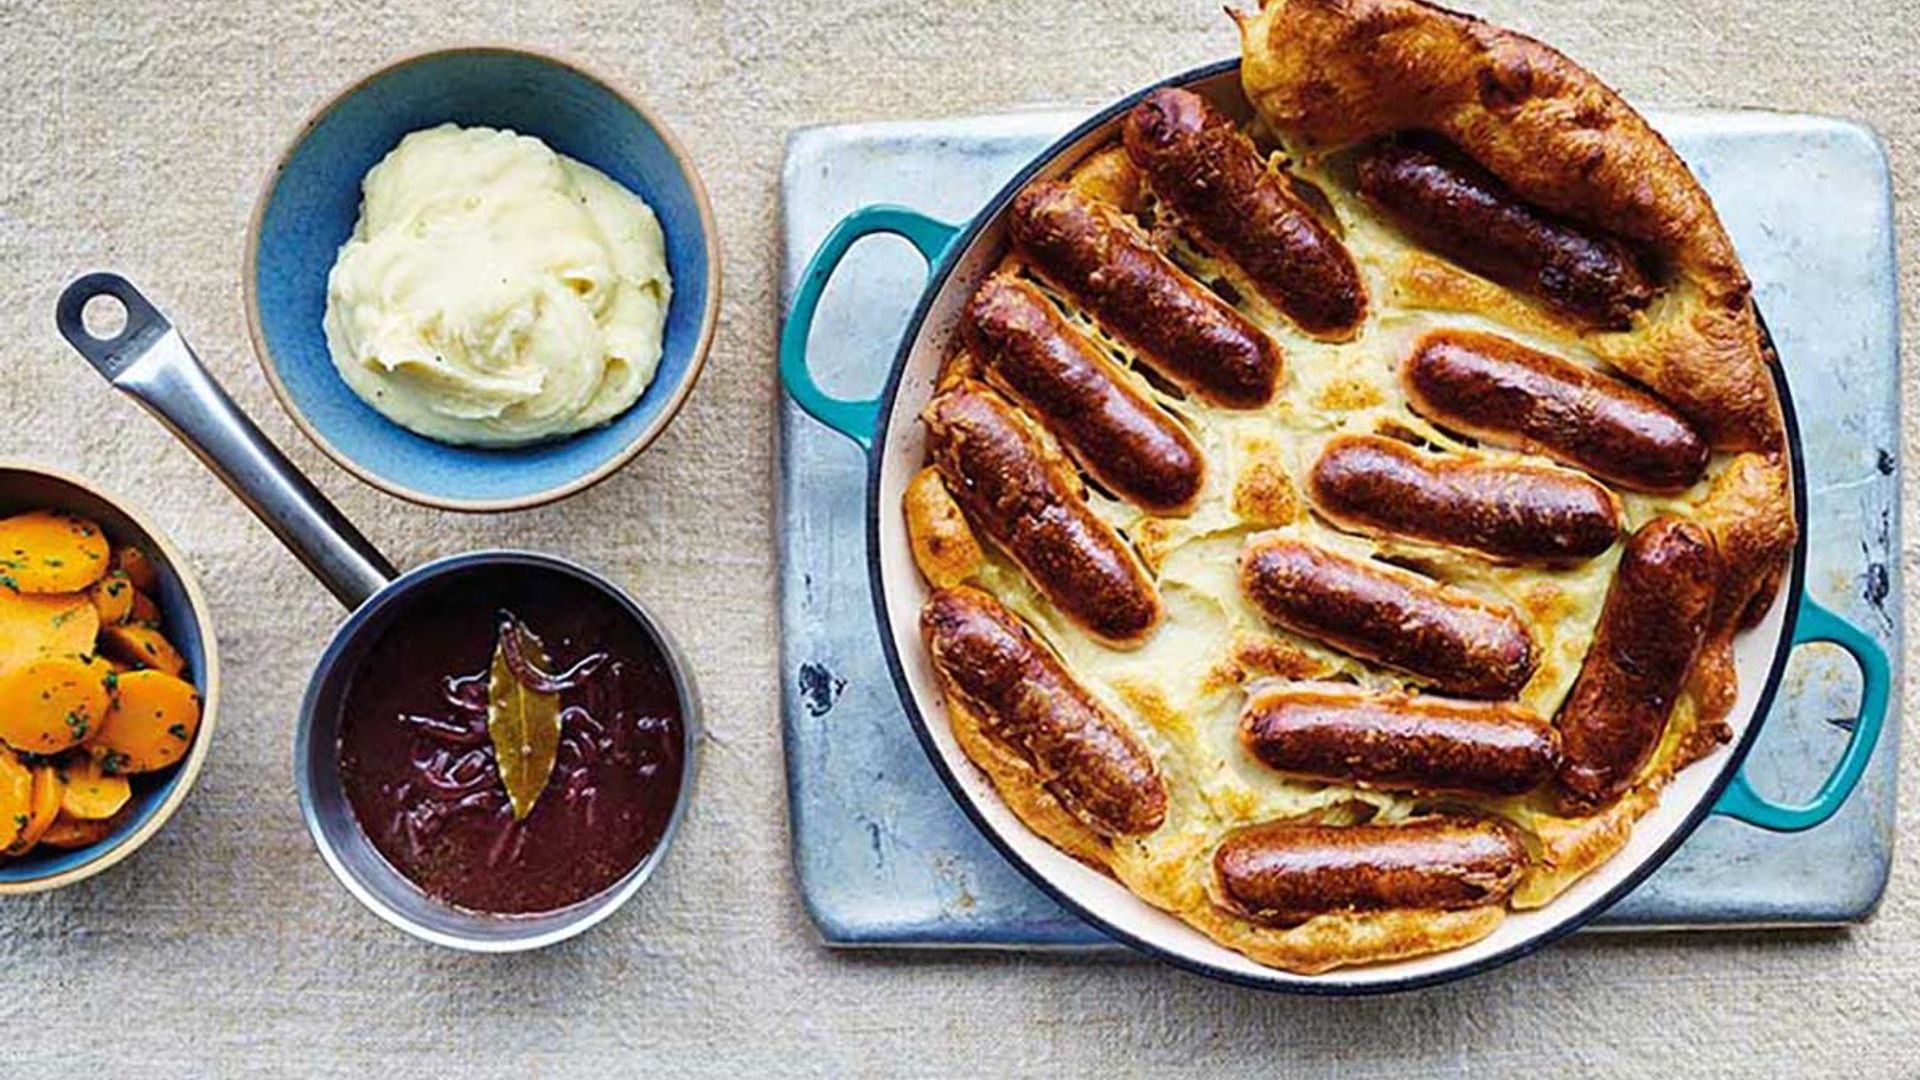 Michelin-starred chef Nathan Outlaw reveals how to cook toad-in-the-hole like a pro